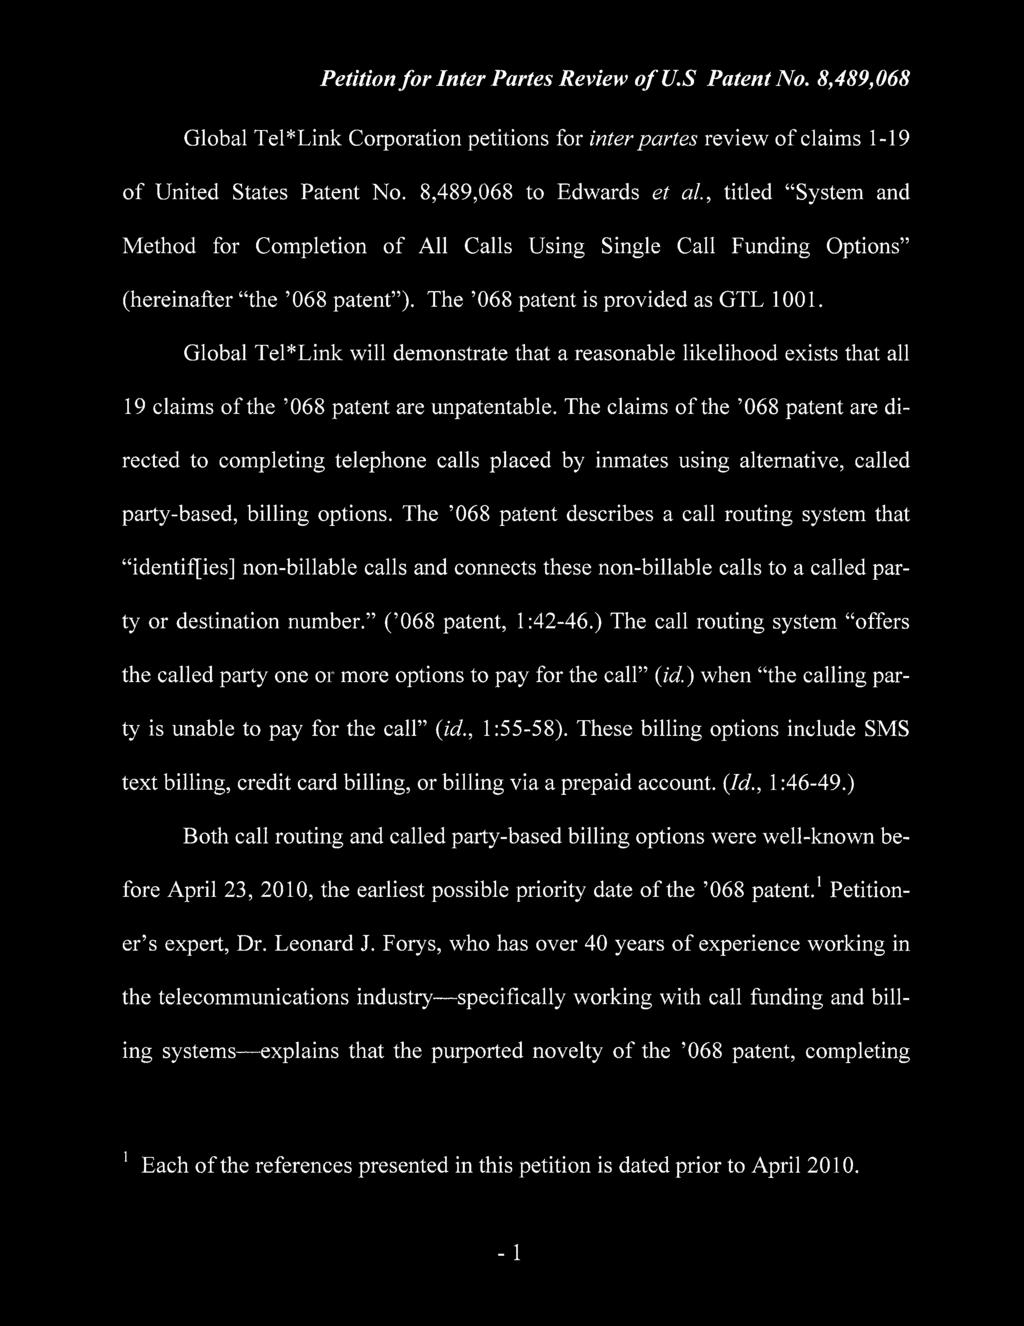 Global Tel*Link Corporation petitions for inter partes review of claims 1-19 of United States Patent No. 8,489,068 to Edwards et al.